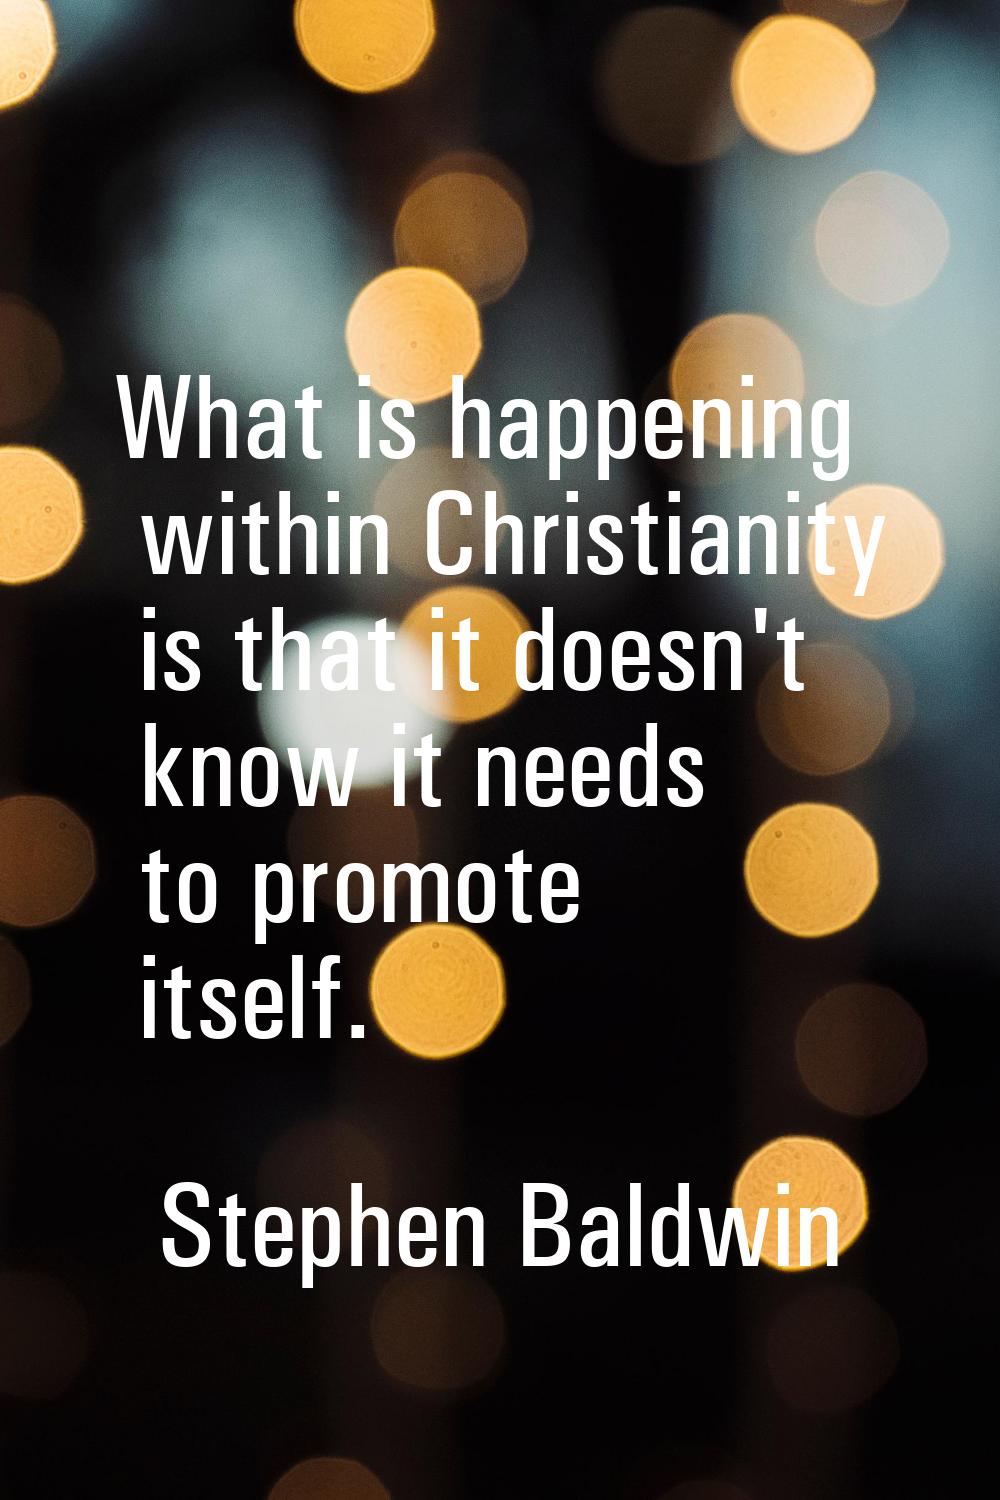 What is happening within Christianity is that it doesn't know it needs to promote itself.